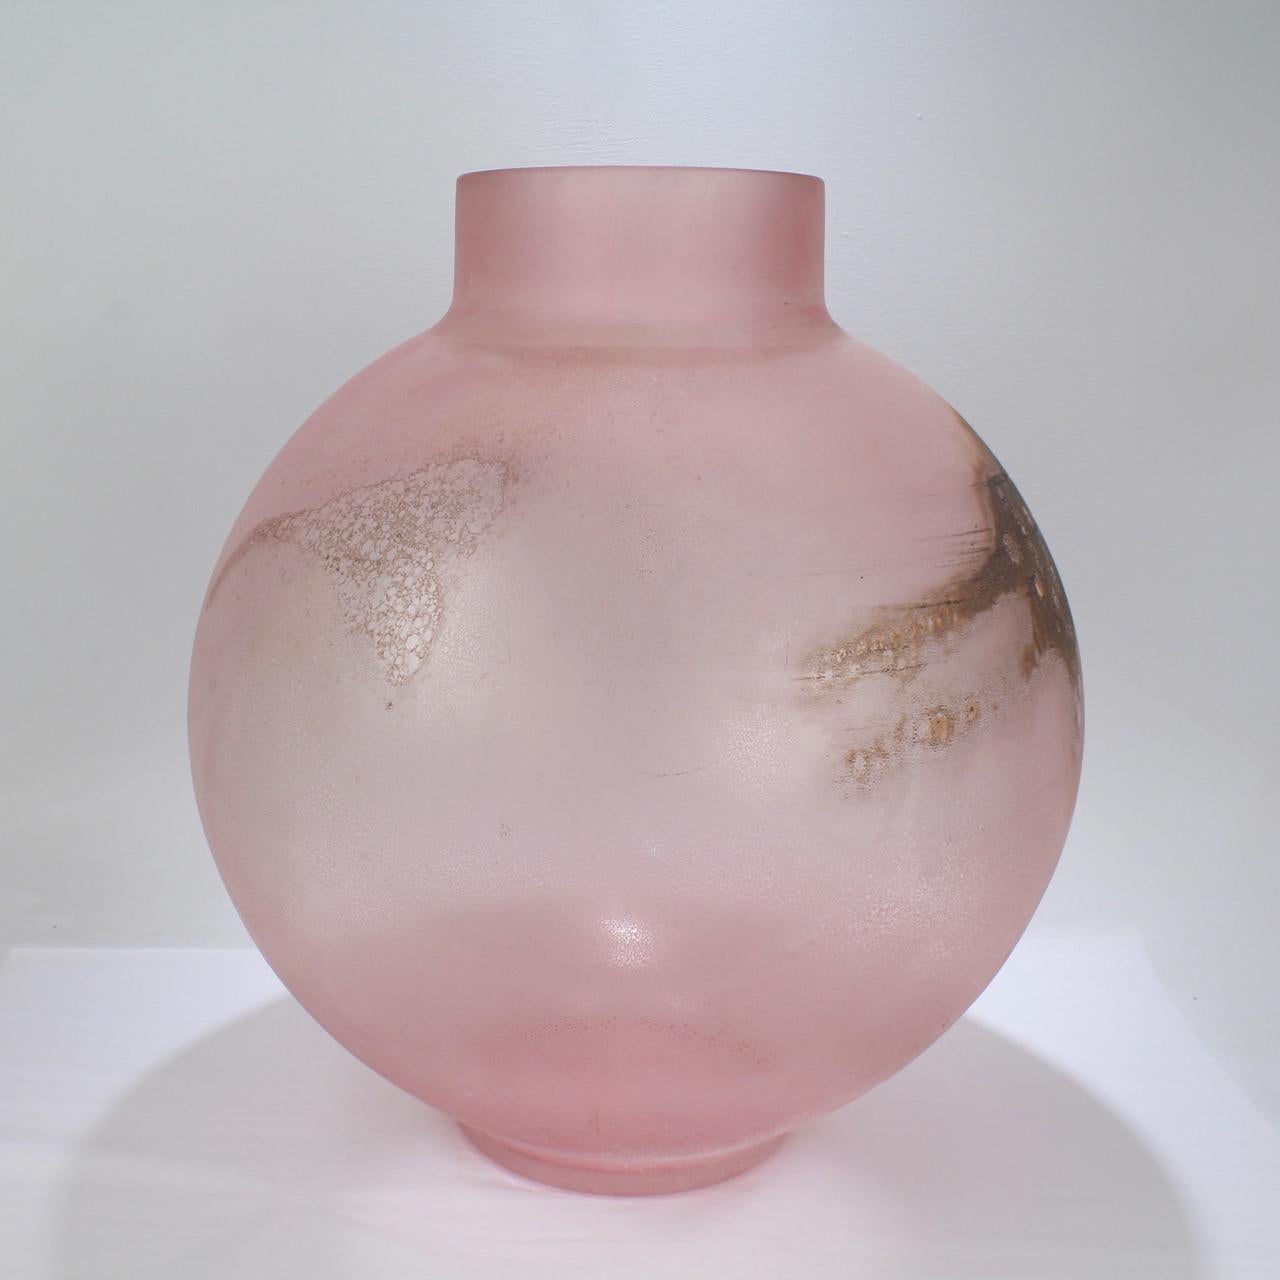 A wonderfully large, spherical Murano glass vase in pink with brown highlights. The vase has an incredible 1980s Memphis School or Miami appeal. It is a bold and impressive piece of glass!

Finished in the Scavo technique, the surface has the